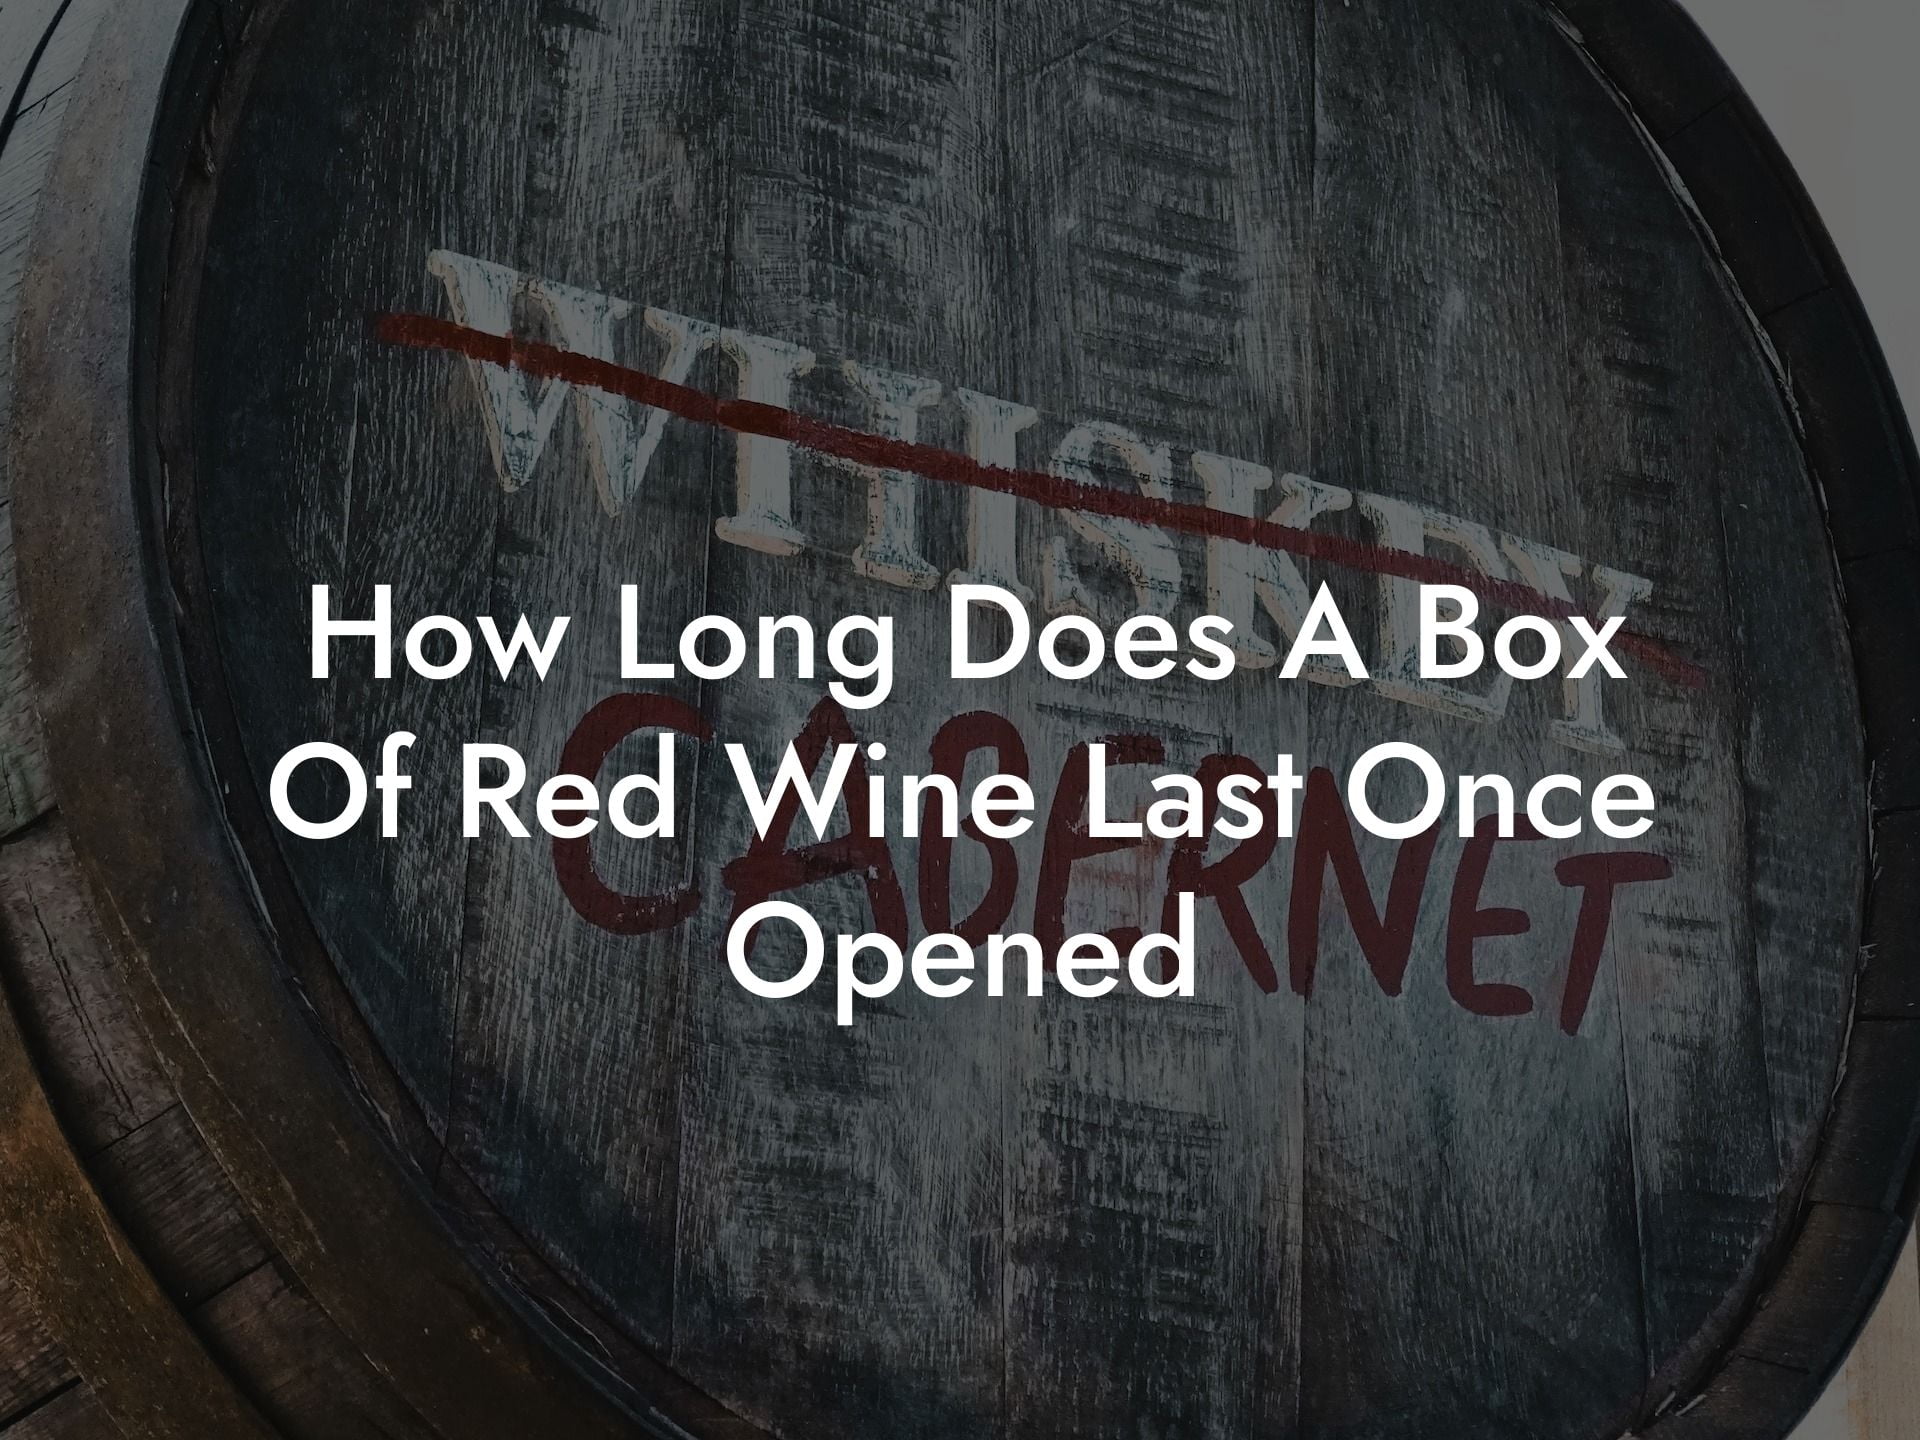 How Long Does A Box Of Red Wine Last Once Opened